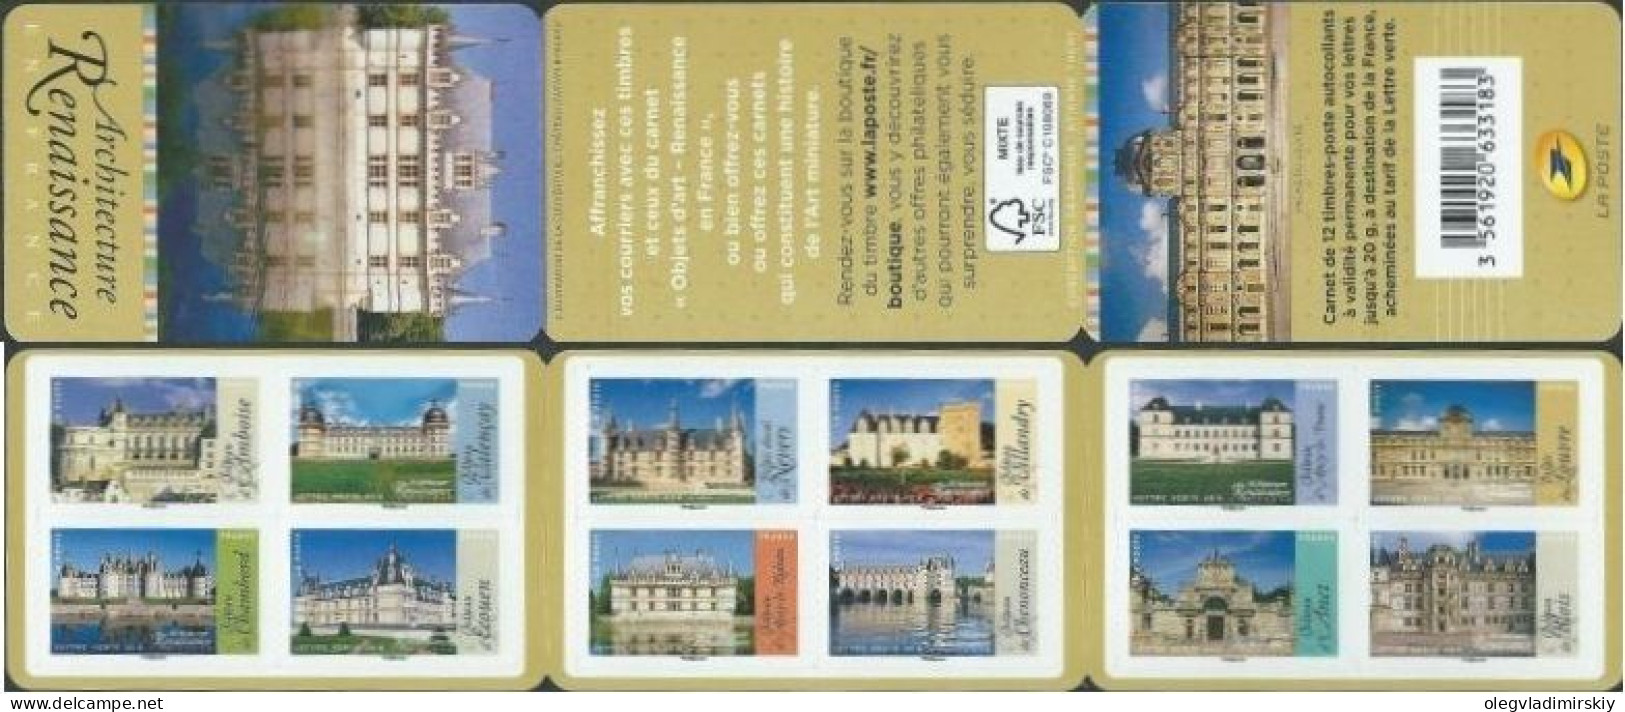 France 2015 Architecture Of Renaissance Castles Palaces Museums Set Of 12 Stamps In Booklet MNH - Kastelen